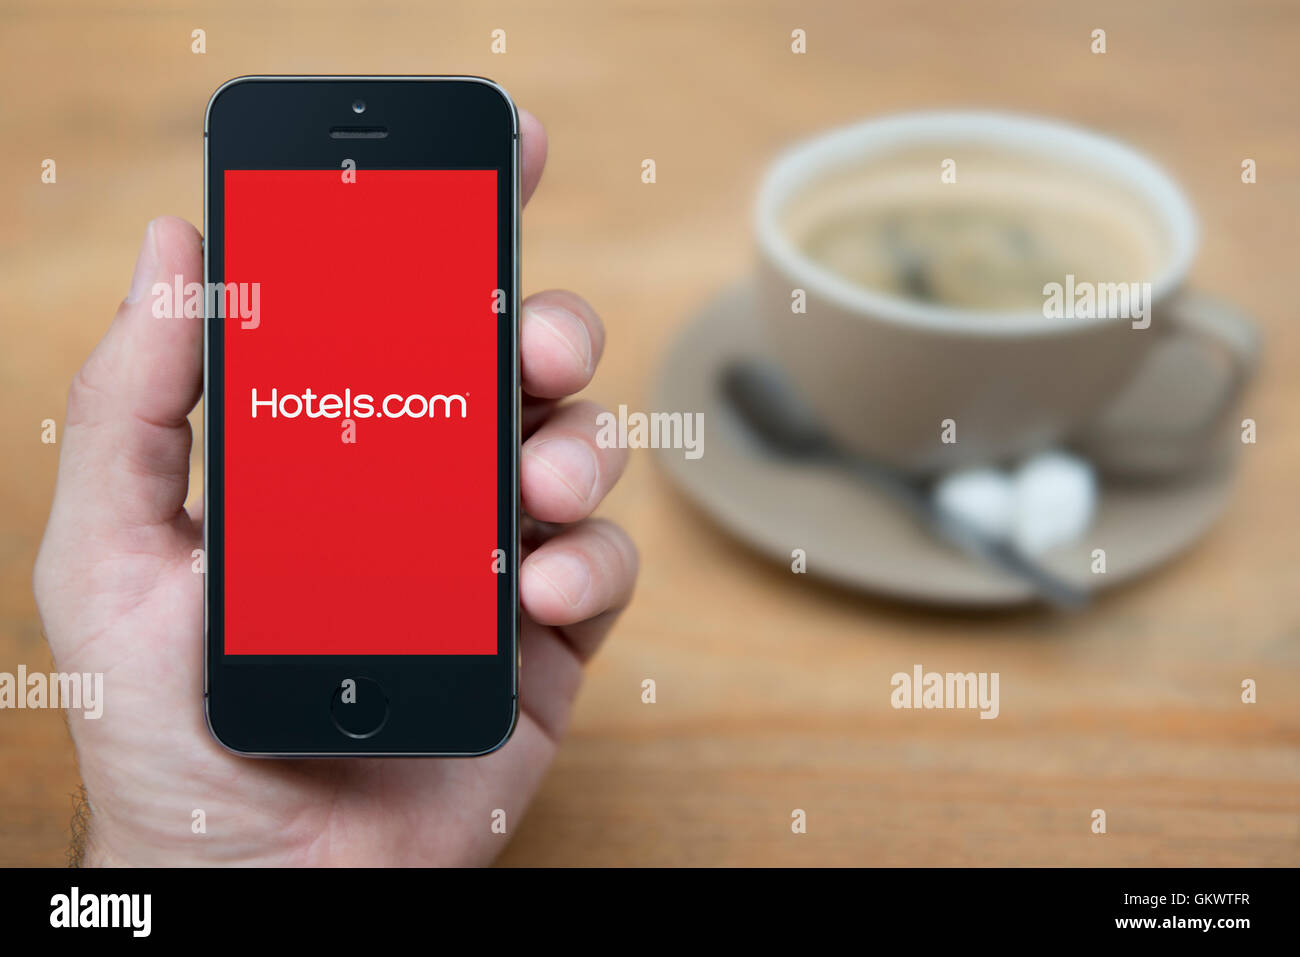 A man looks at his iPhone which displays the Hotels.com logo, while sat with a cup of coffee (Editorial use only). Stock Photo